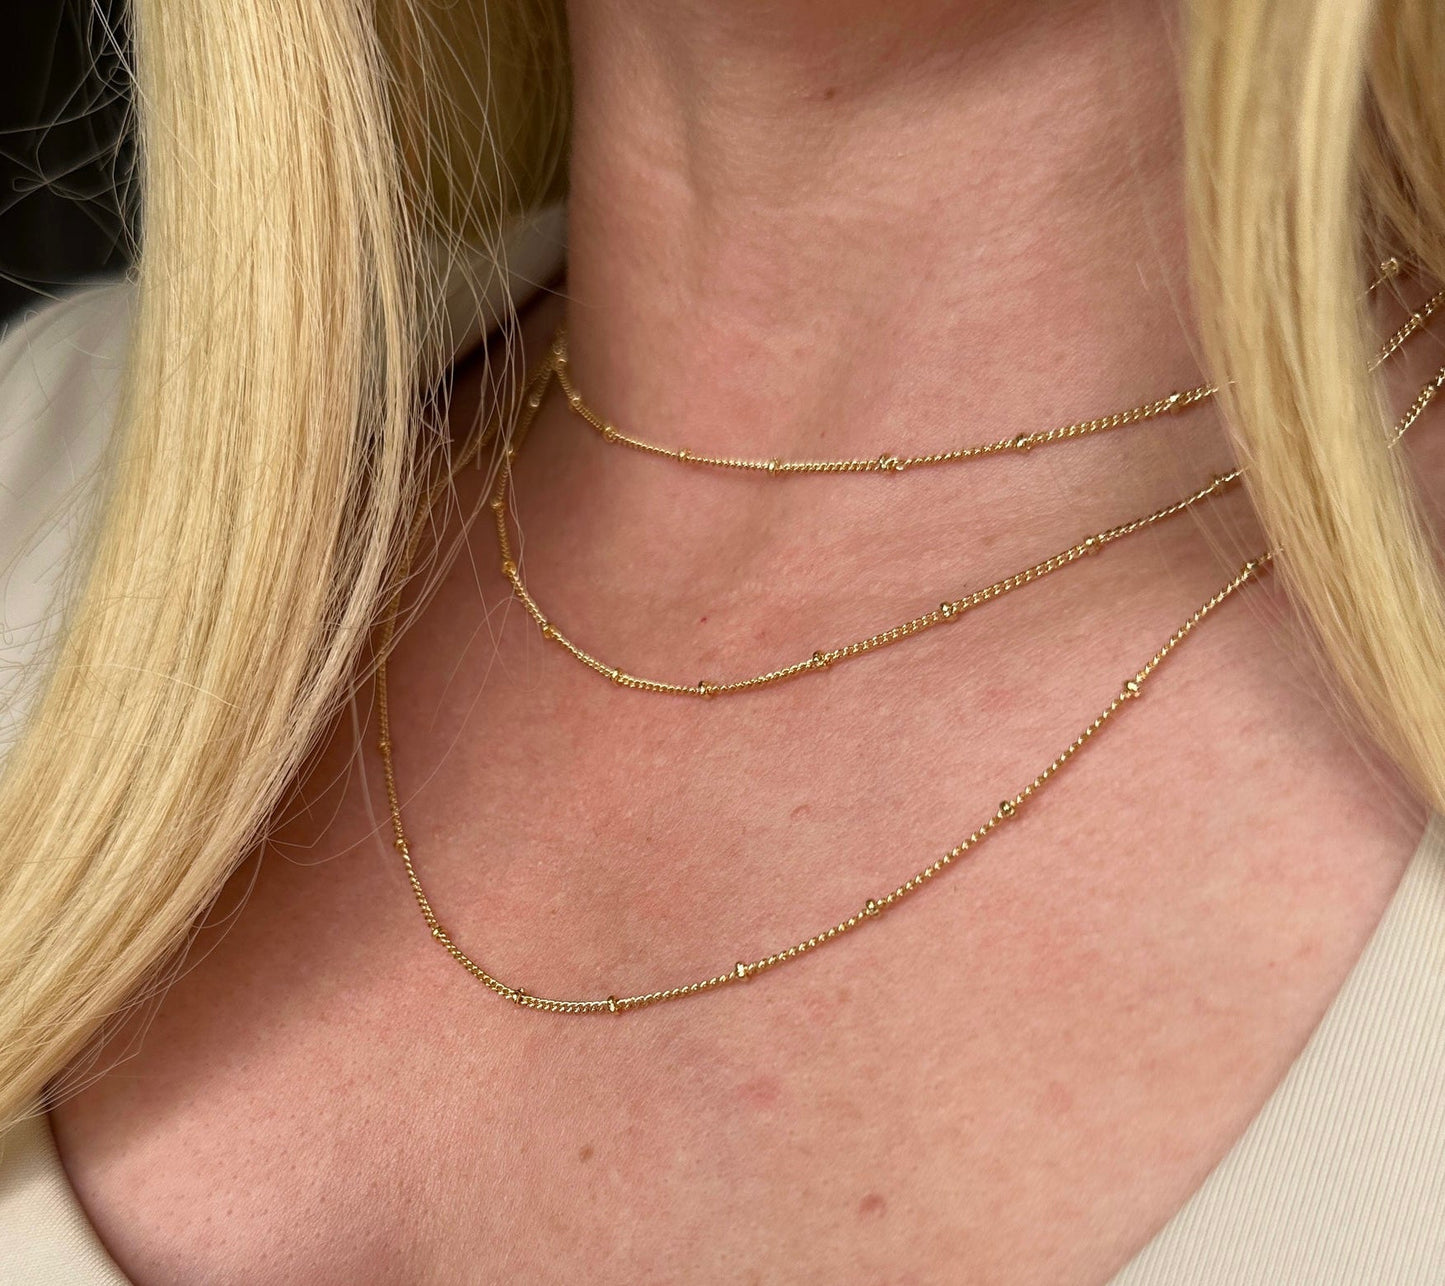 The Four Way Cross Gold Filled Satellite Chain Necklace